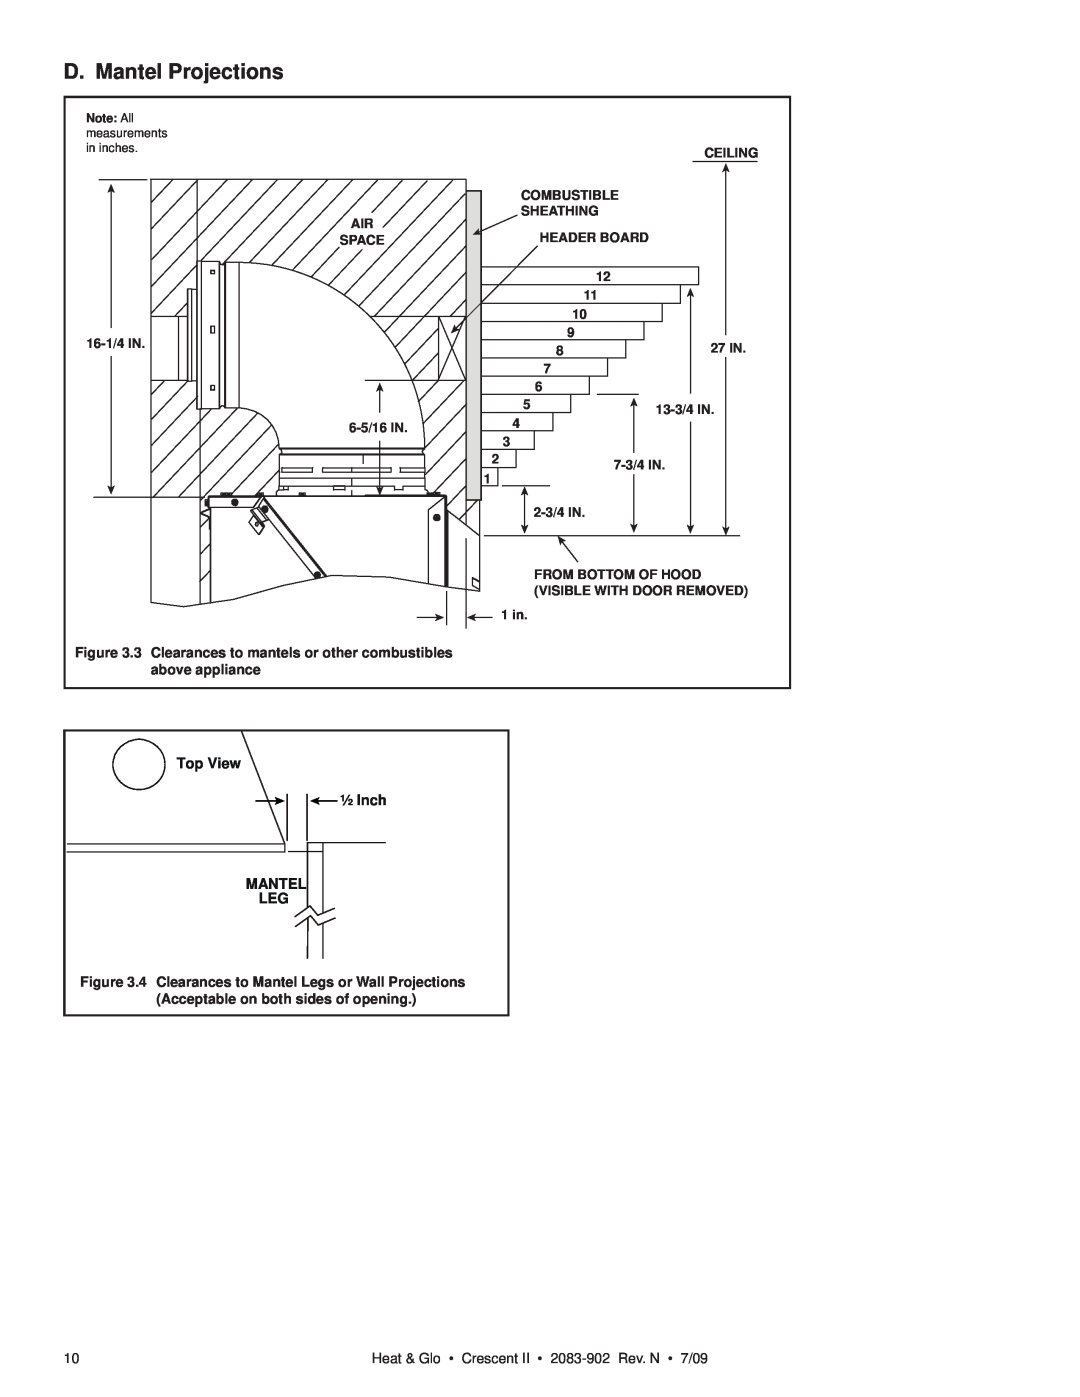 Heat & Glo LifeStyle CRESCENT II owner manual D. Mantel Projections, Top View ½ Inch MANTEL LEG 